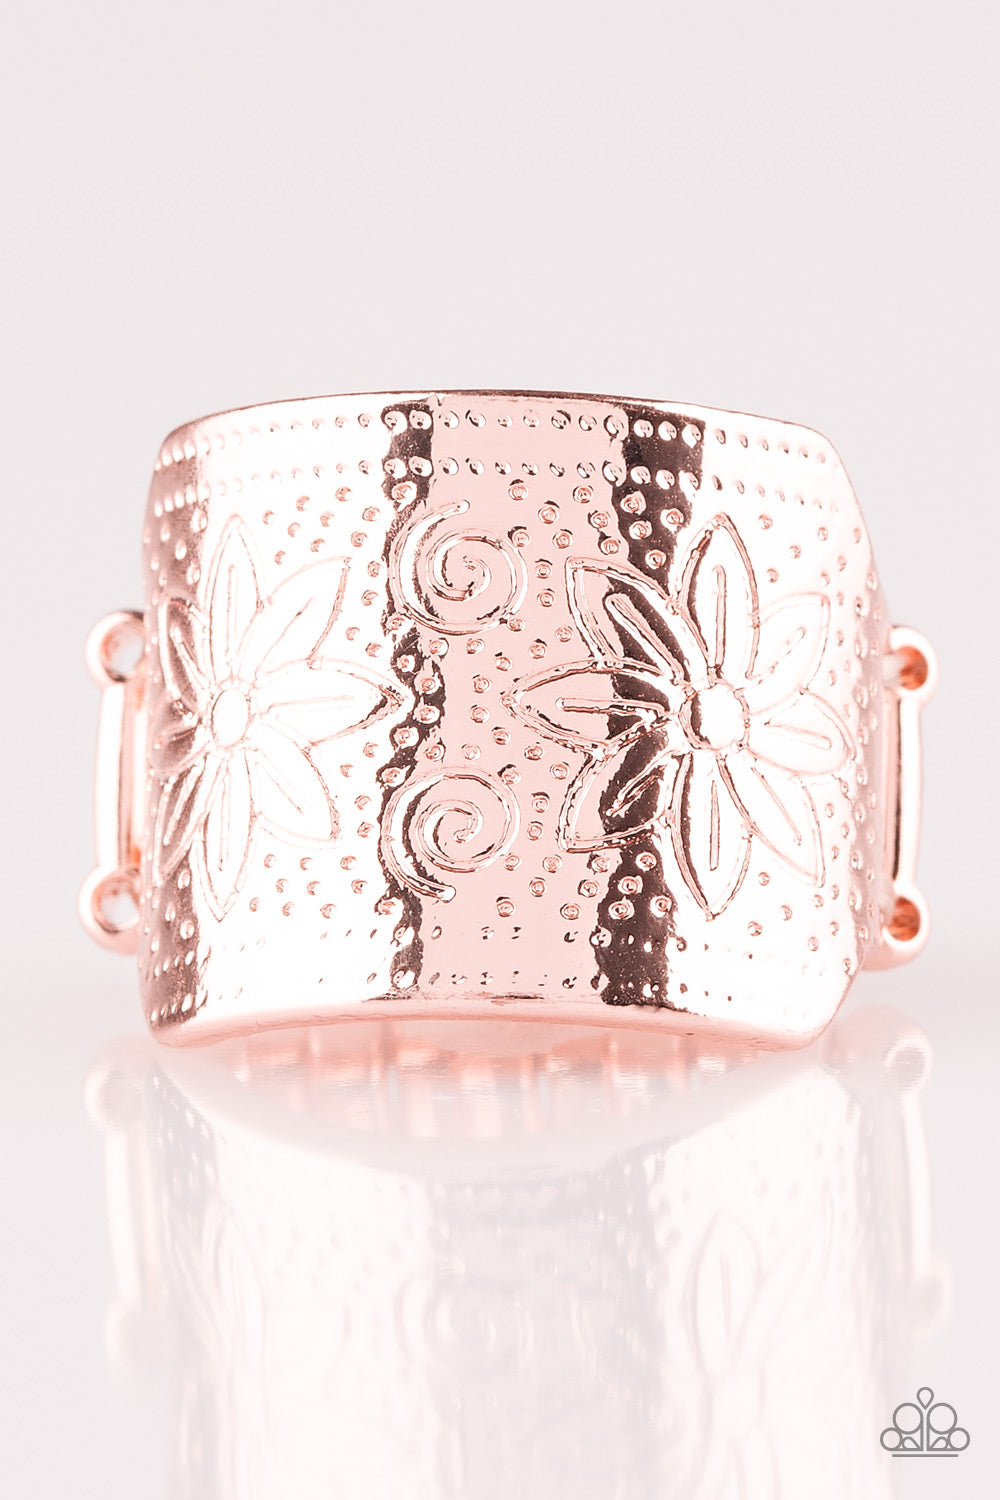 Wild Meadows Rose Gold Paparazzi Rings Cashmere Pink Jewels - Cashmere Pink Jewels & Accessories, Cashmere Pink Jewels & Accessories - Paparazzi